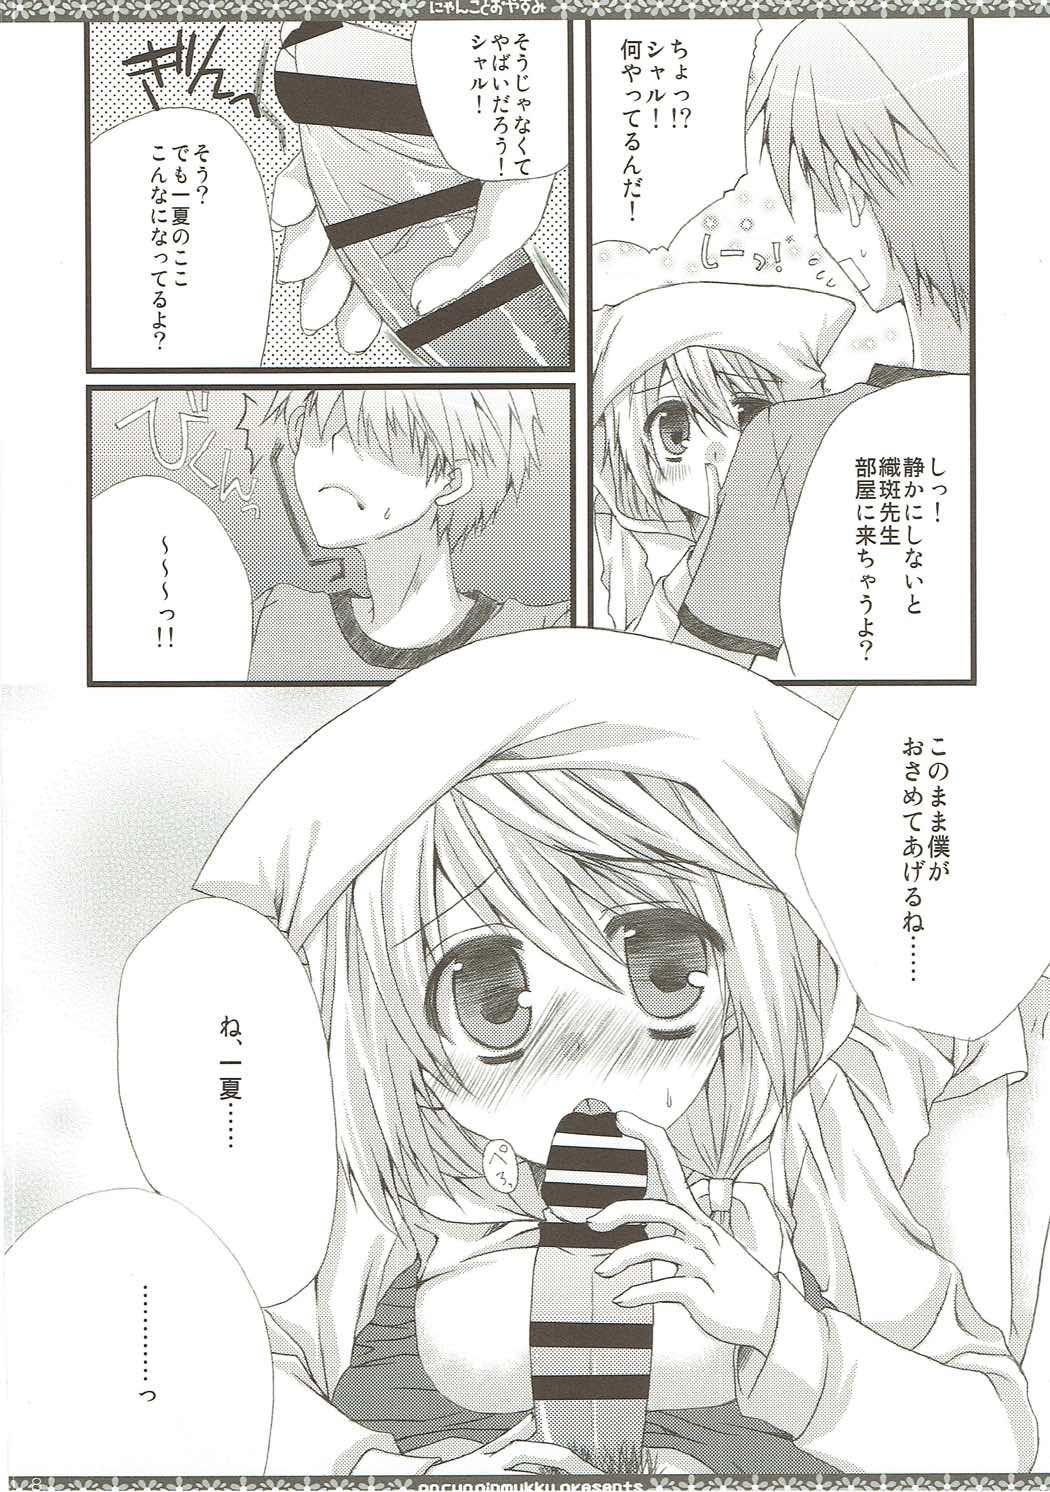 Dirty CharColle - Charlotte Dunois collection - Infinite stratos Wank - Page 7